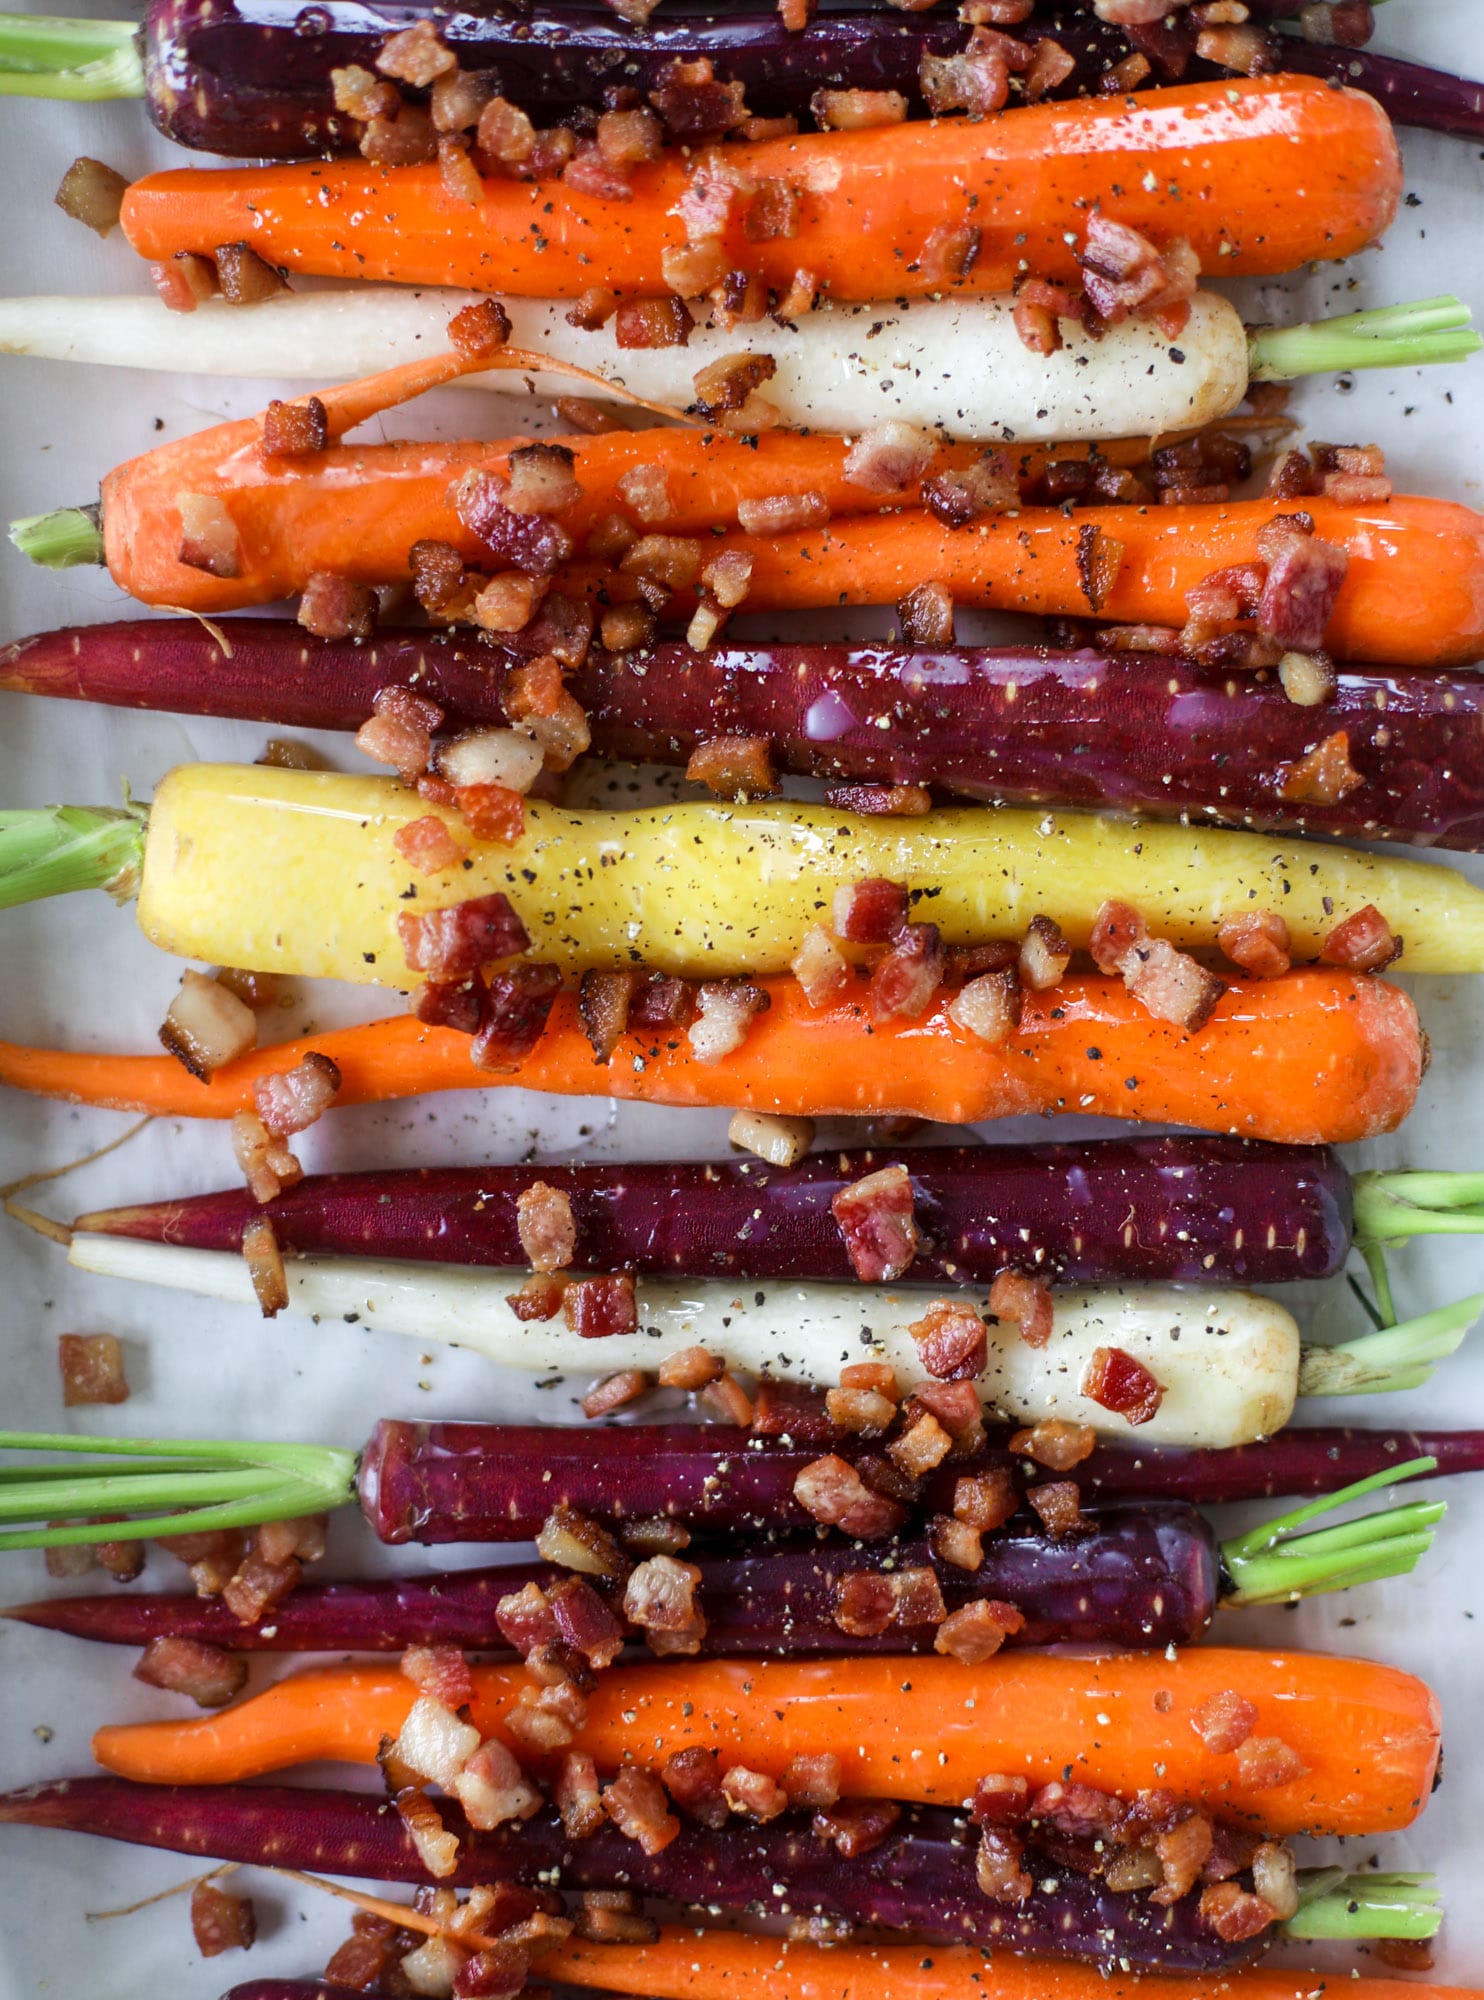 Sweet carrots are drizzled with bacon fat and chopped bacon, then roasted until they are tender, sweet and caramely. So much flavor!